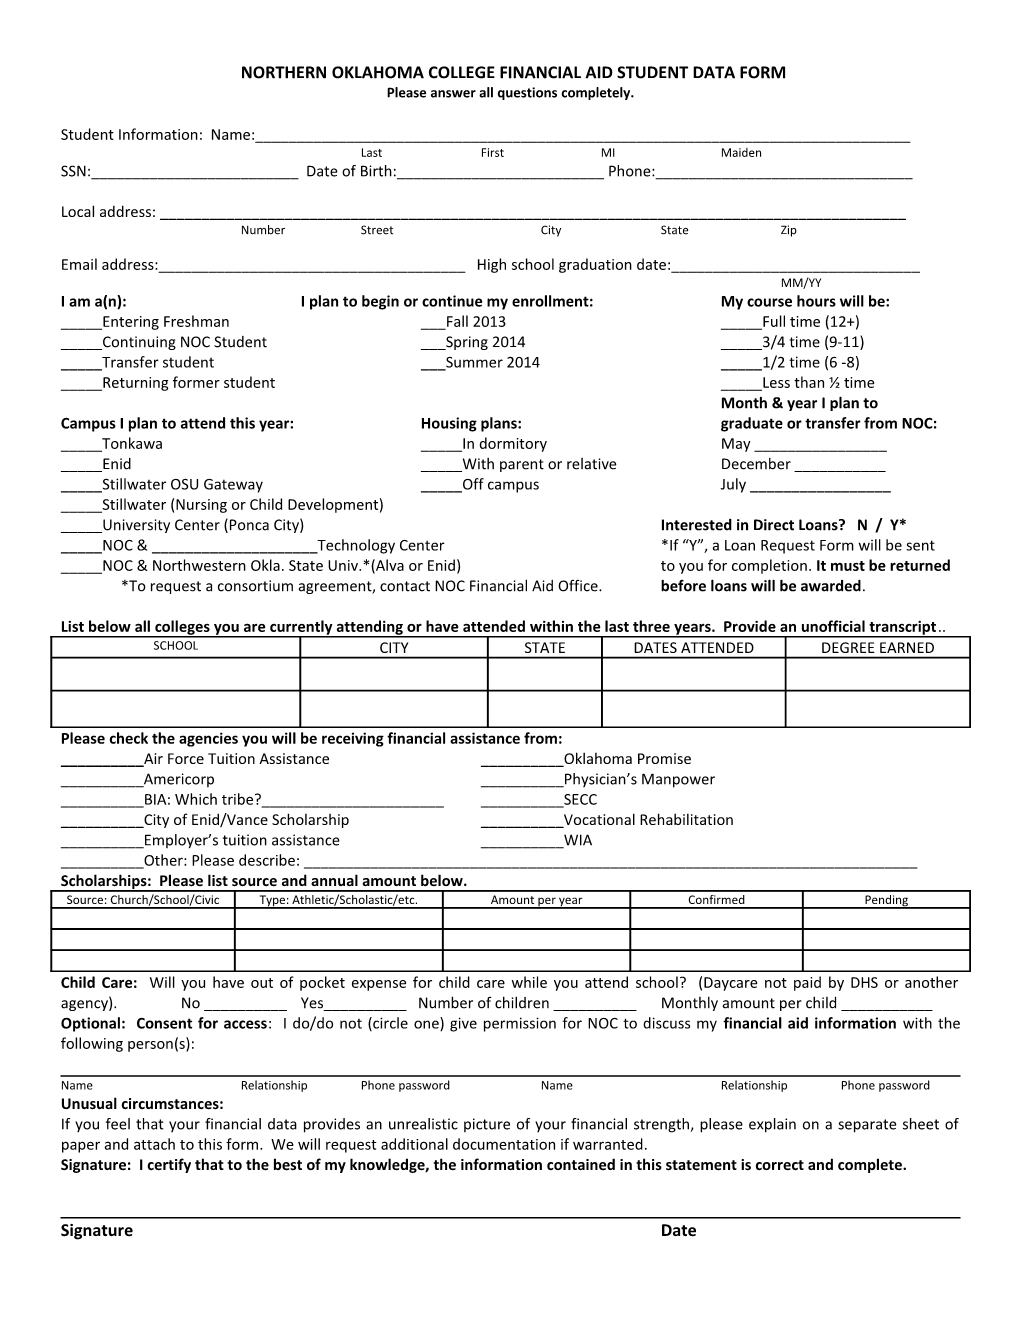 Northern Oklahoma College Financial Aid Student Data Form